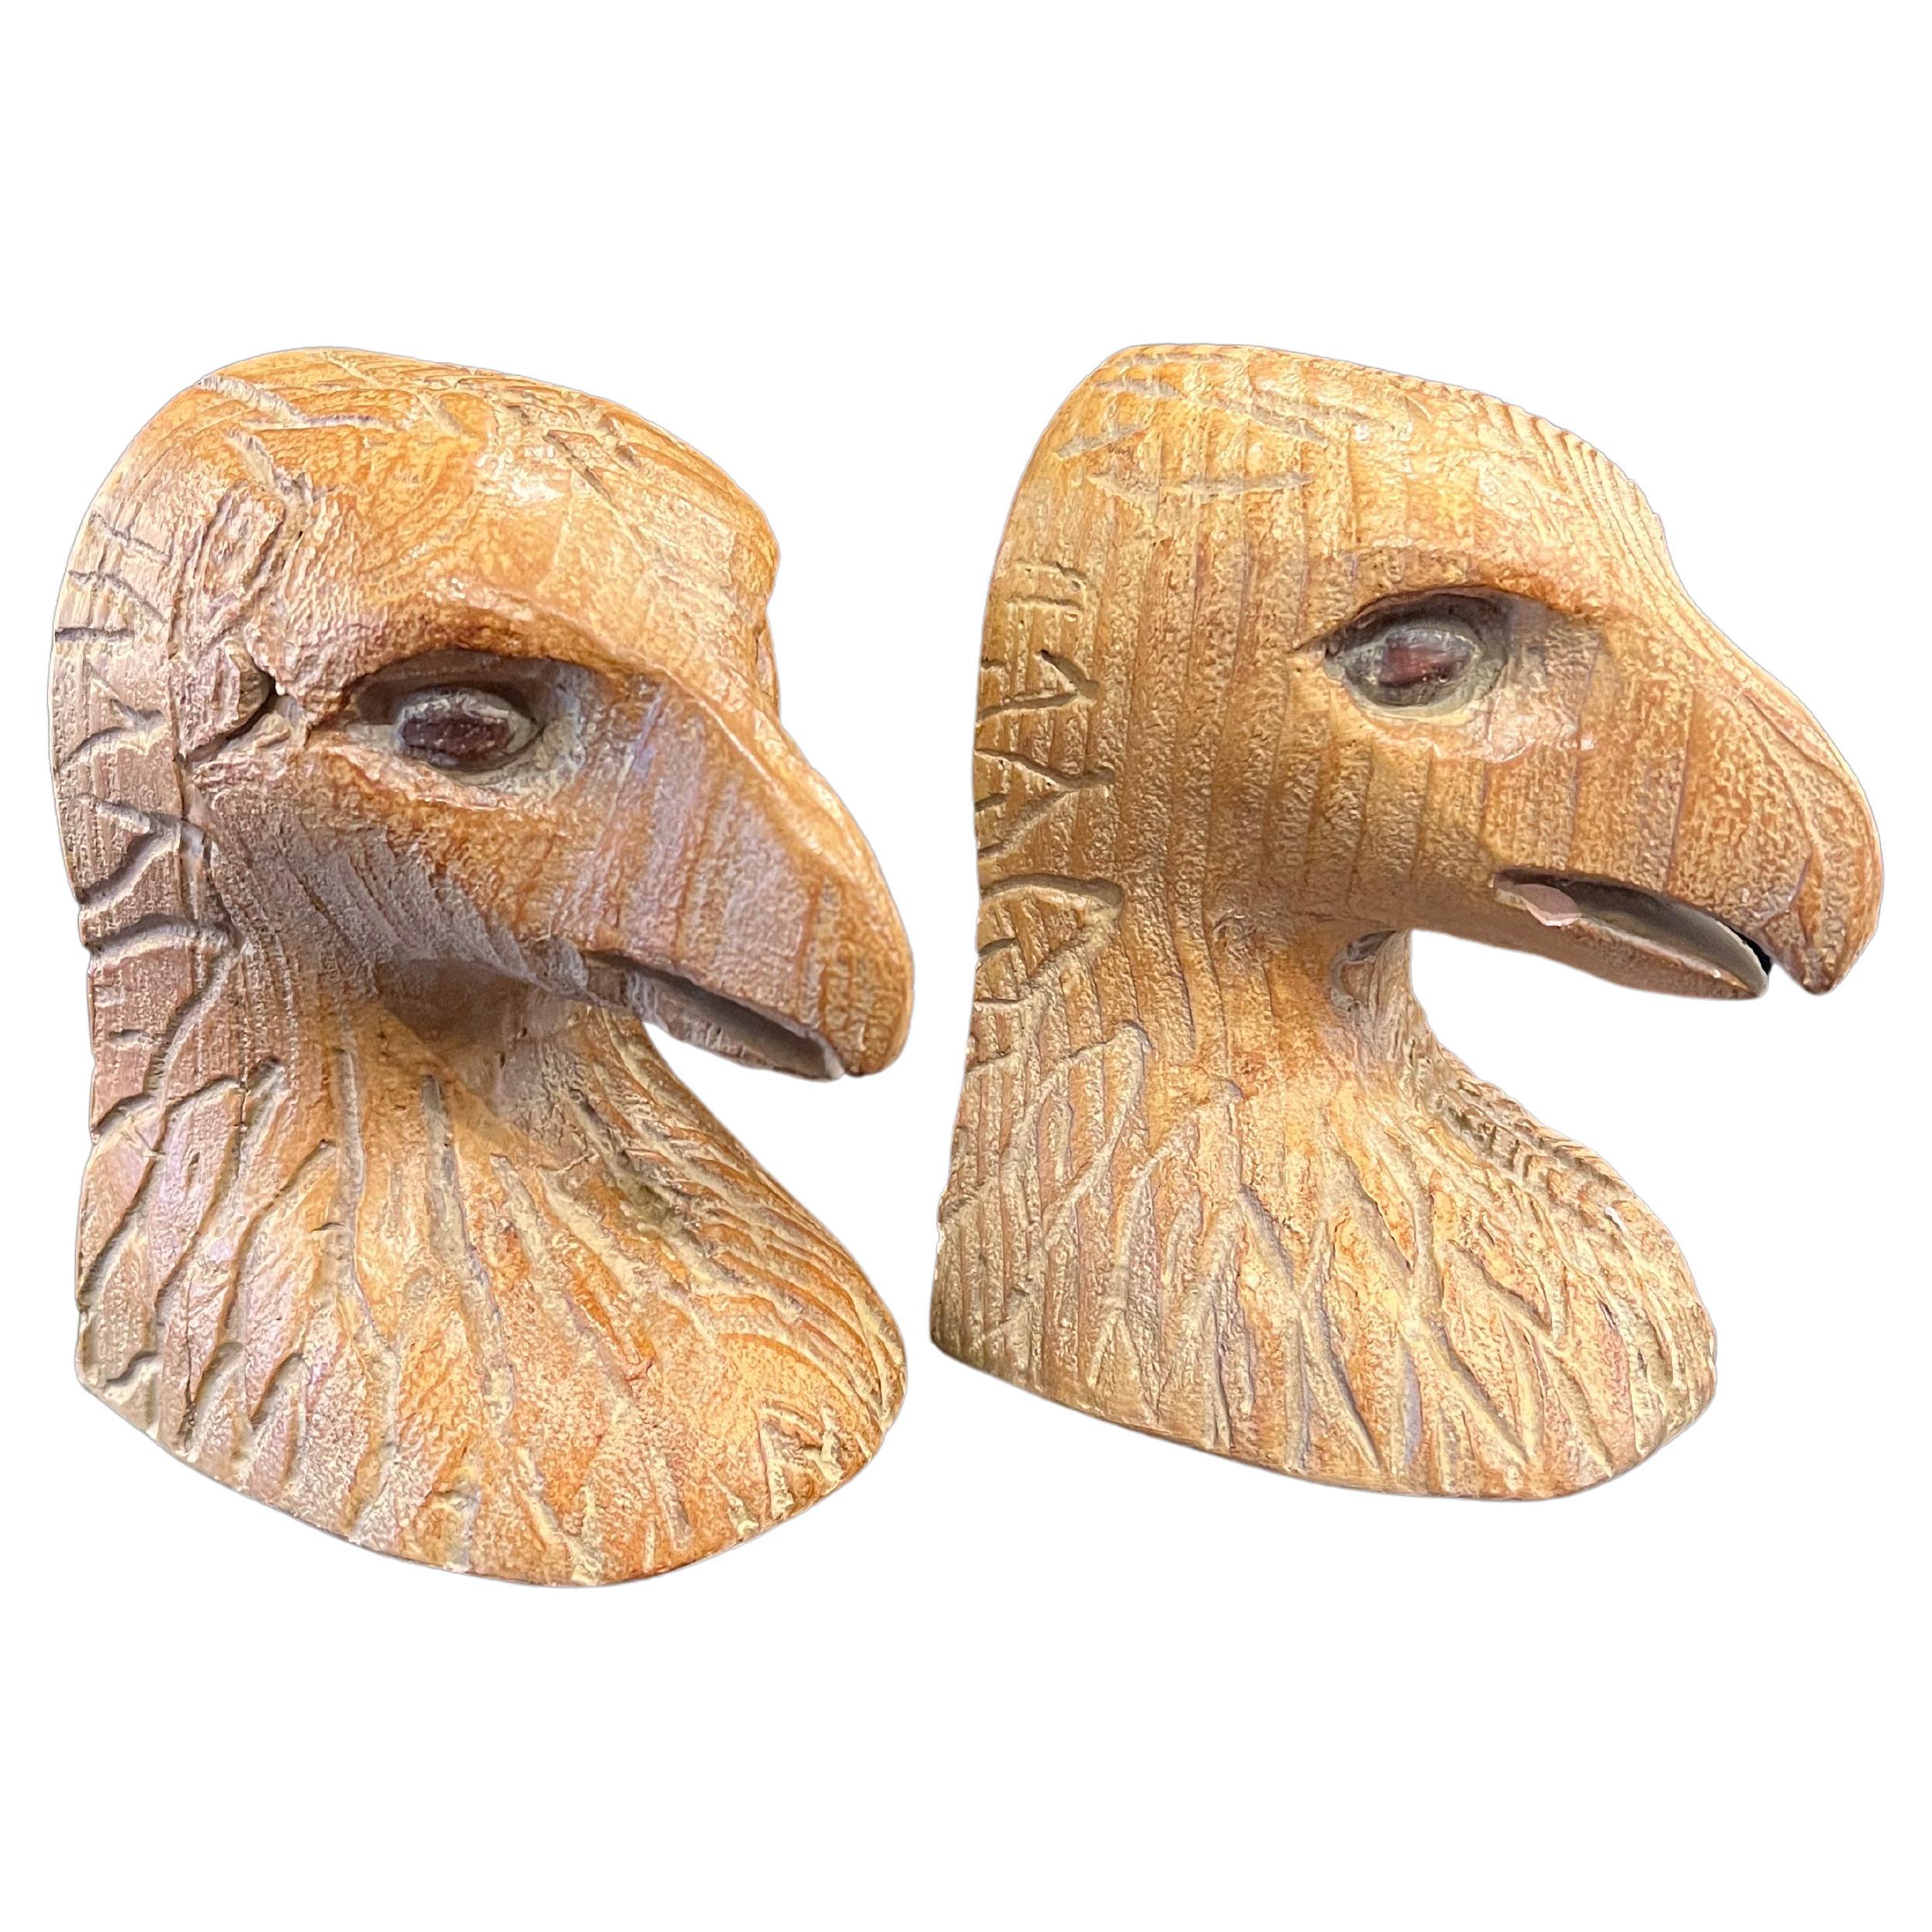 American Eagle Ceramic Bookends Faux Wood Finish For Sale